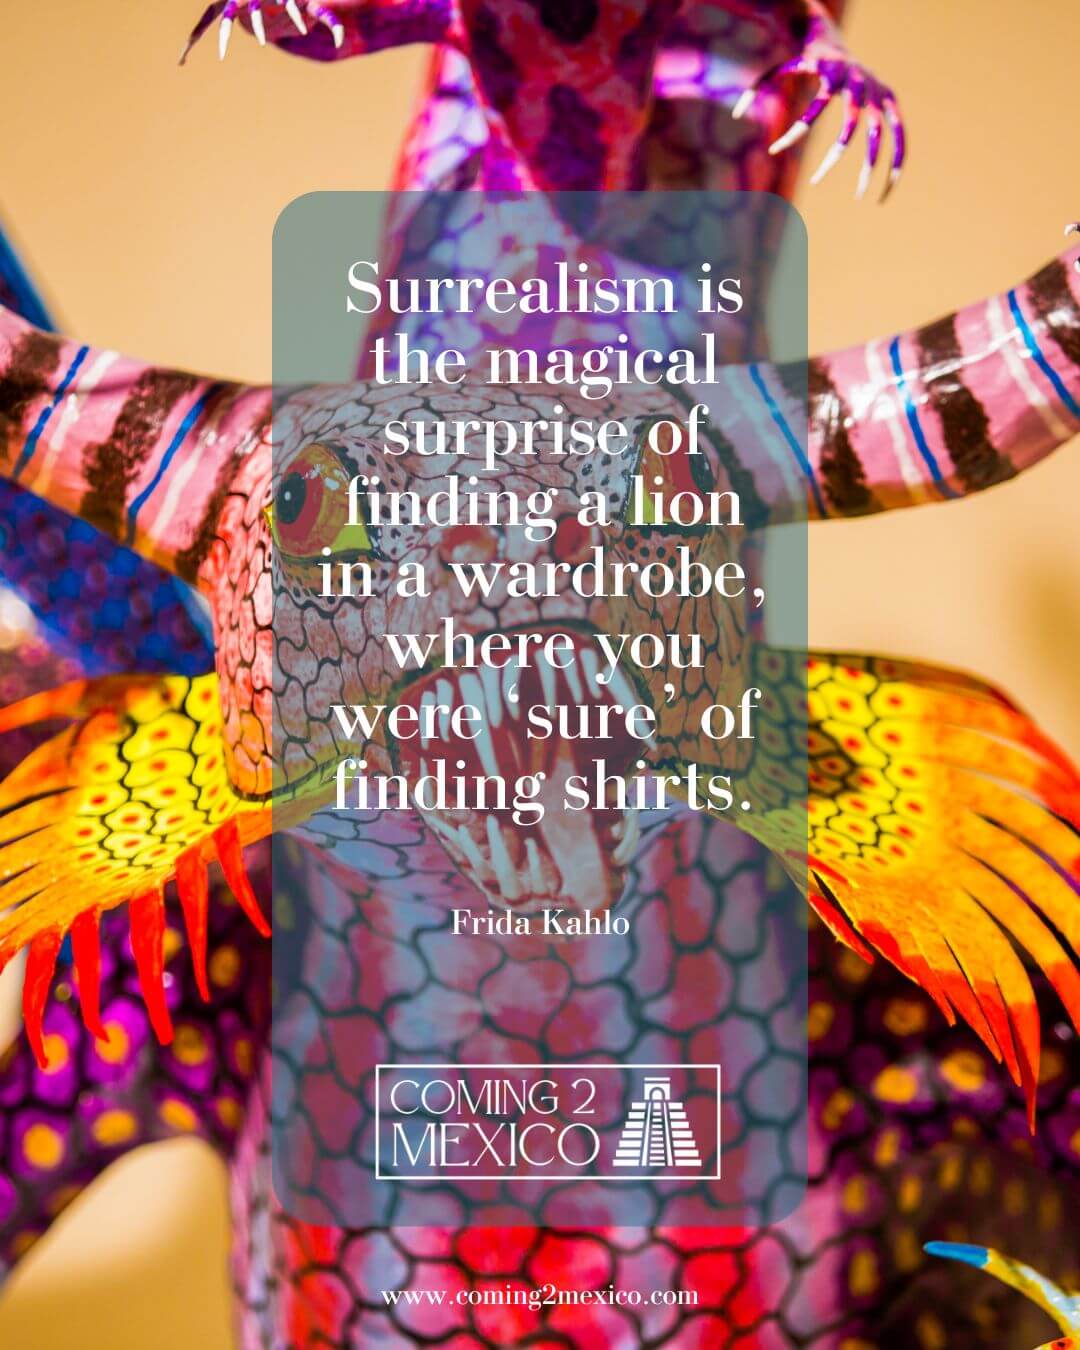 “Surrealism is the magical surprise of finding a lion in a wardrobe, where you were ‘sure’ of finding shirts.” - Frida Kahlo